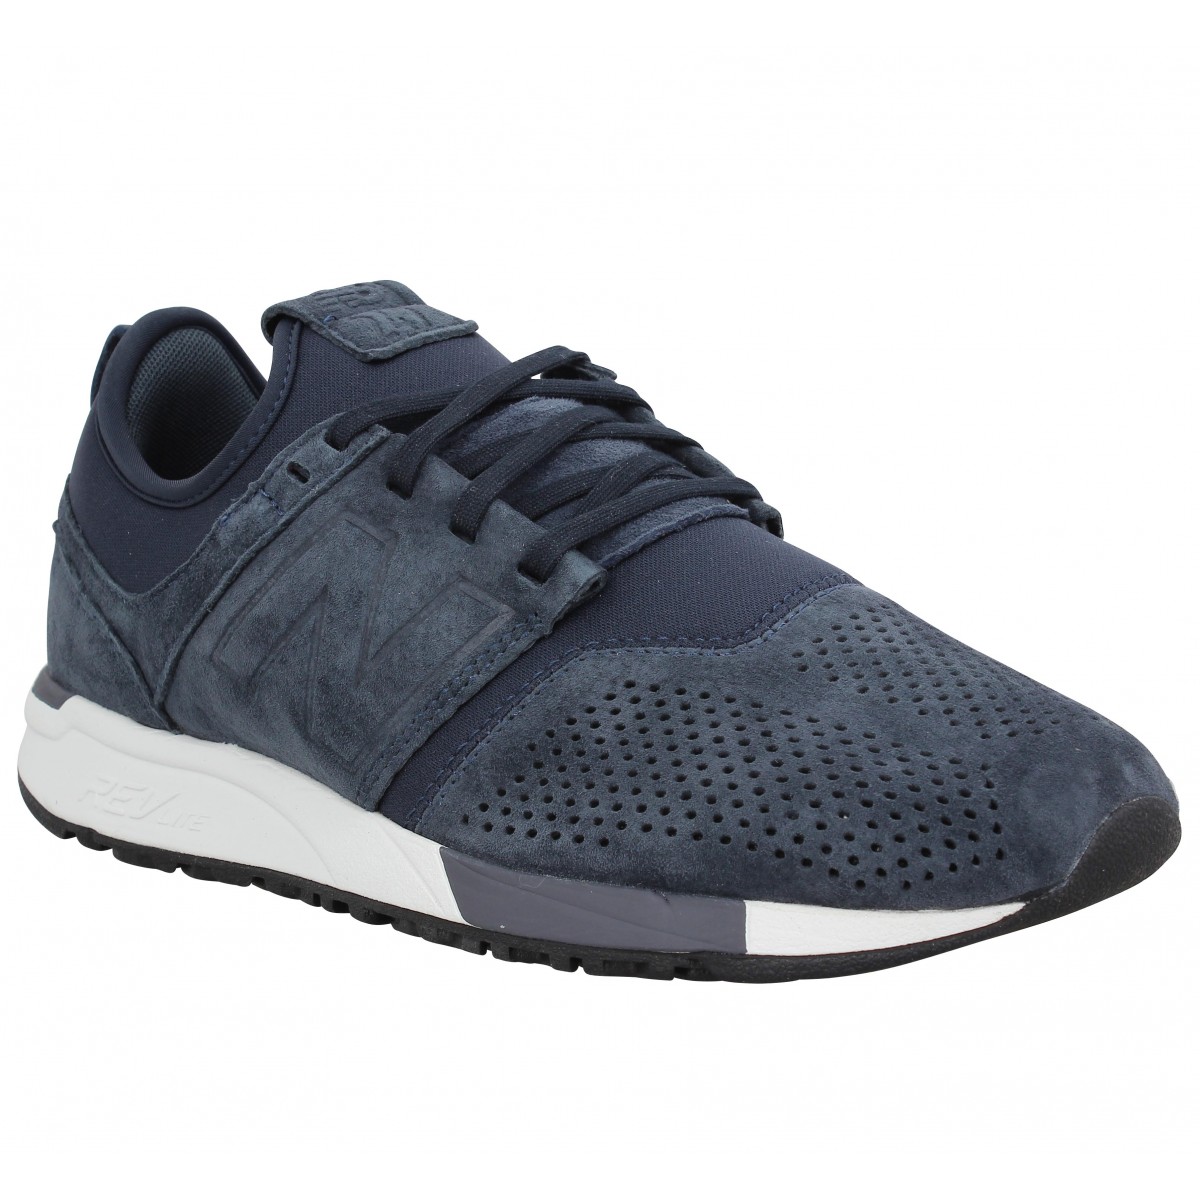 New balance 247 suede homme navy homme 